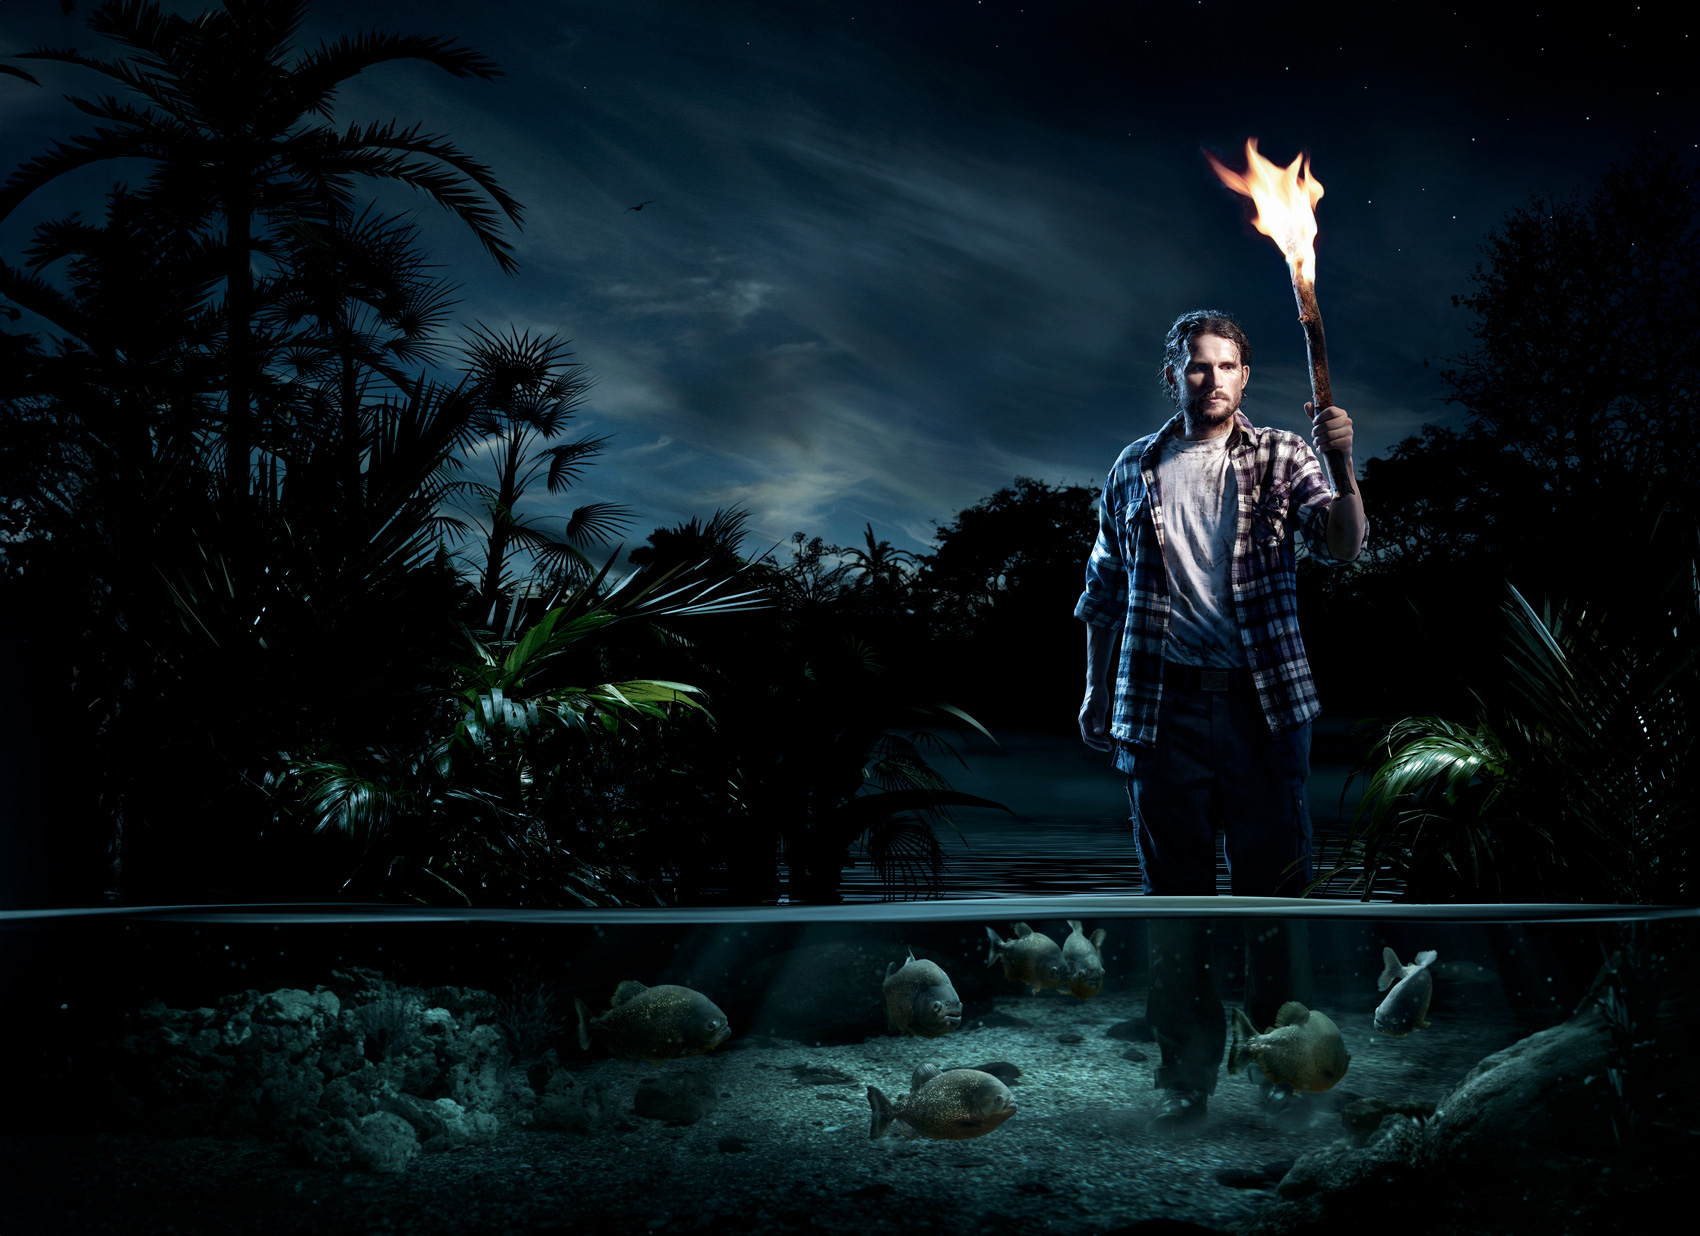 A nighttime scene where a person is standing in front of a body of water, holding a burning torch high. The sky is dark with stars and clouds, and there are palm trees in the background. Under the water surface, you can see piranhas and aquatic plants. The photo is interesting because it shows a contrast between the fiery torch above the water and the calm underwater environment.